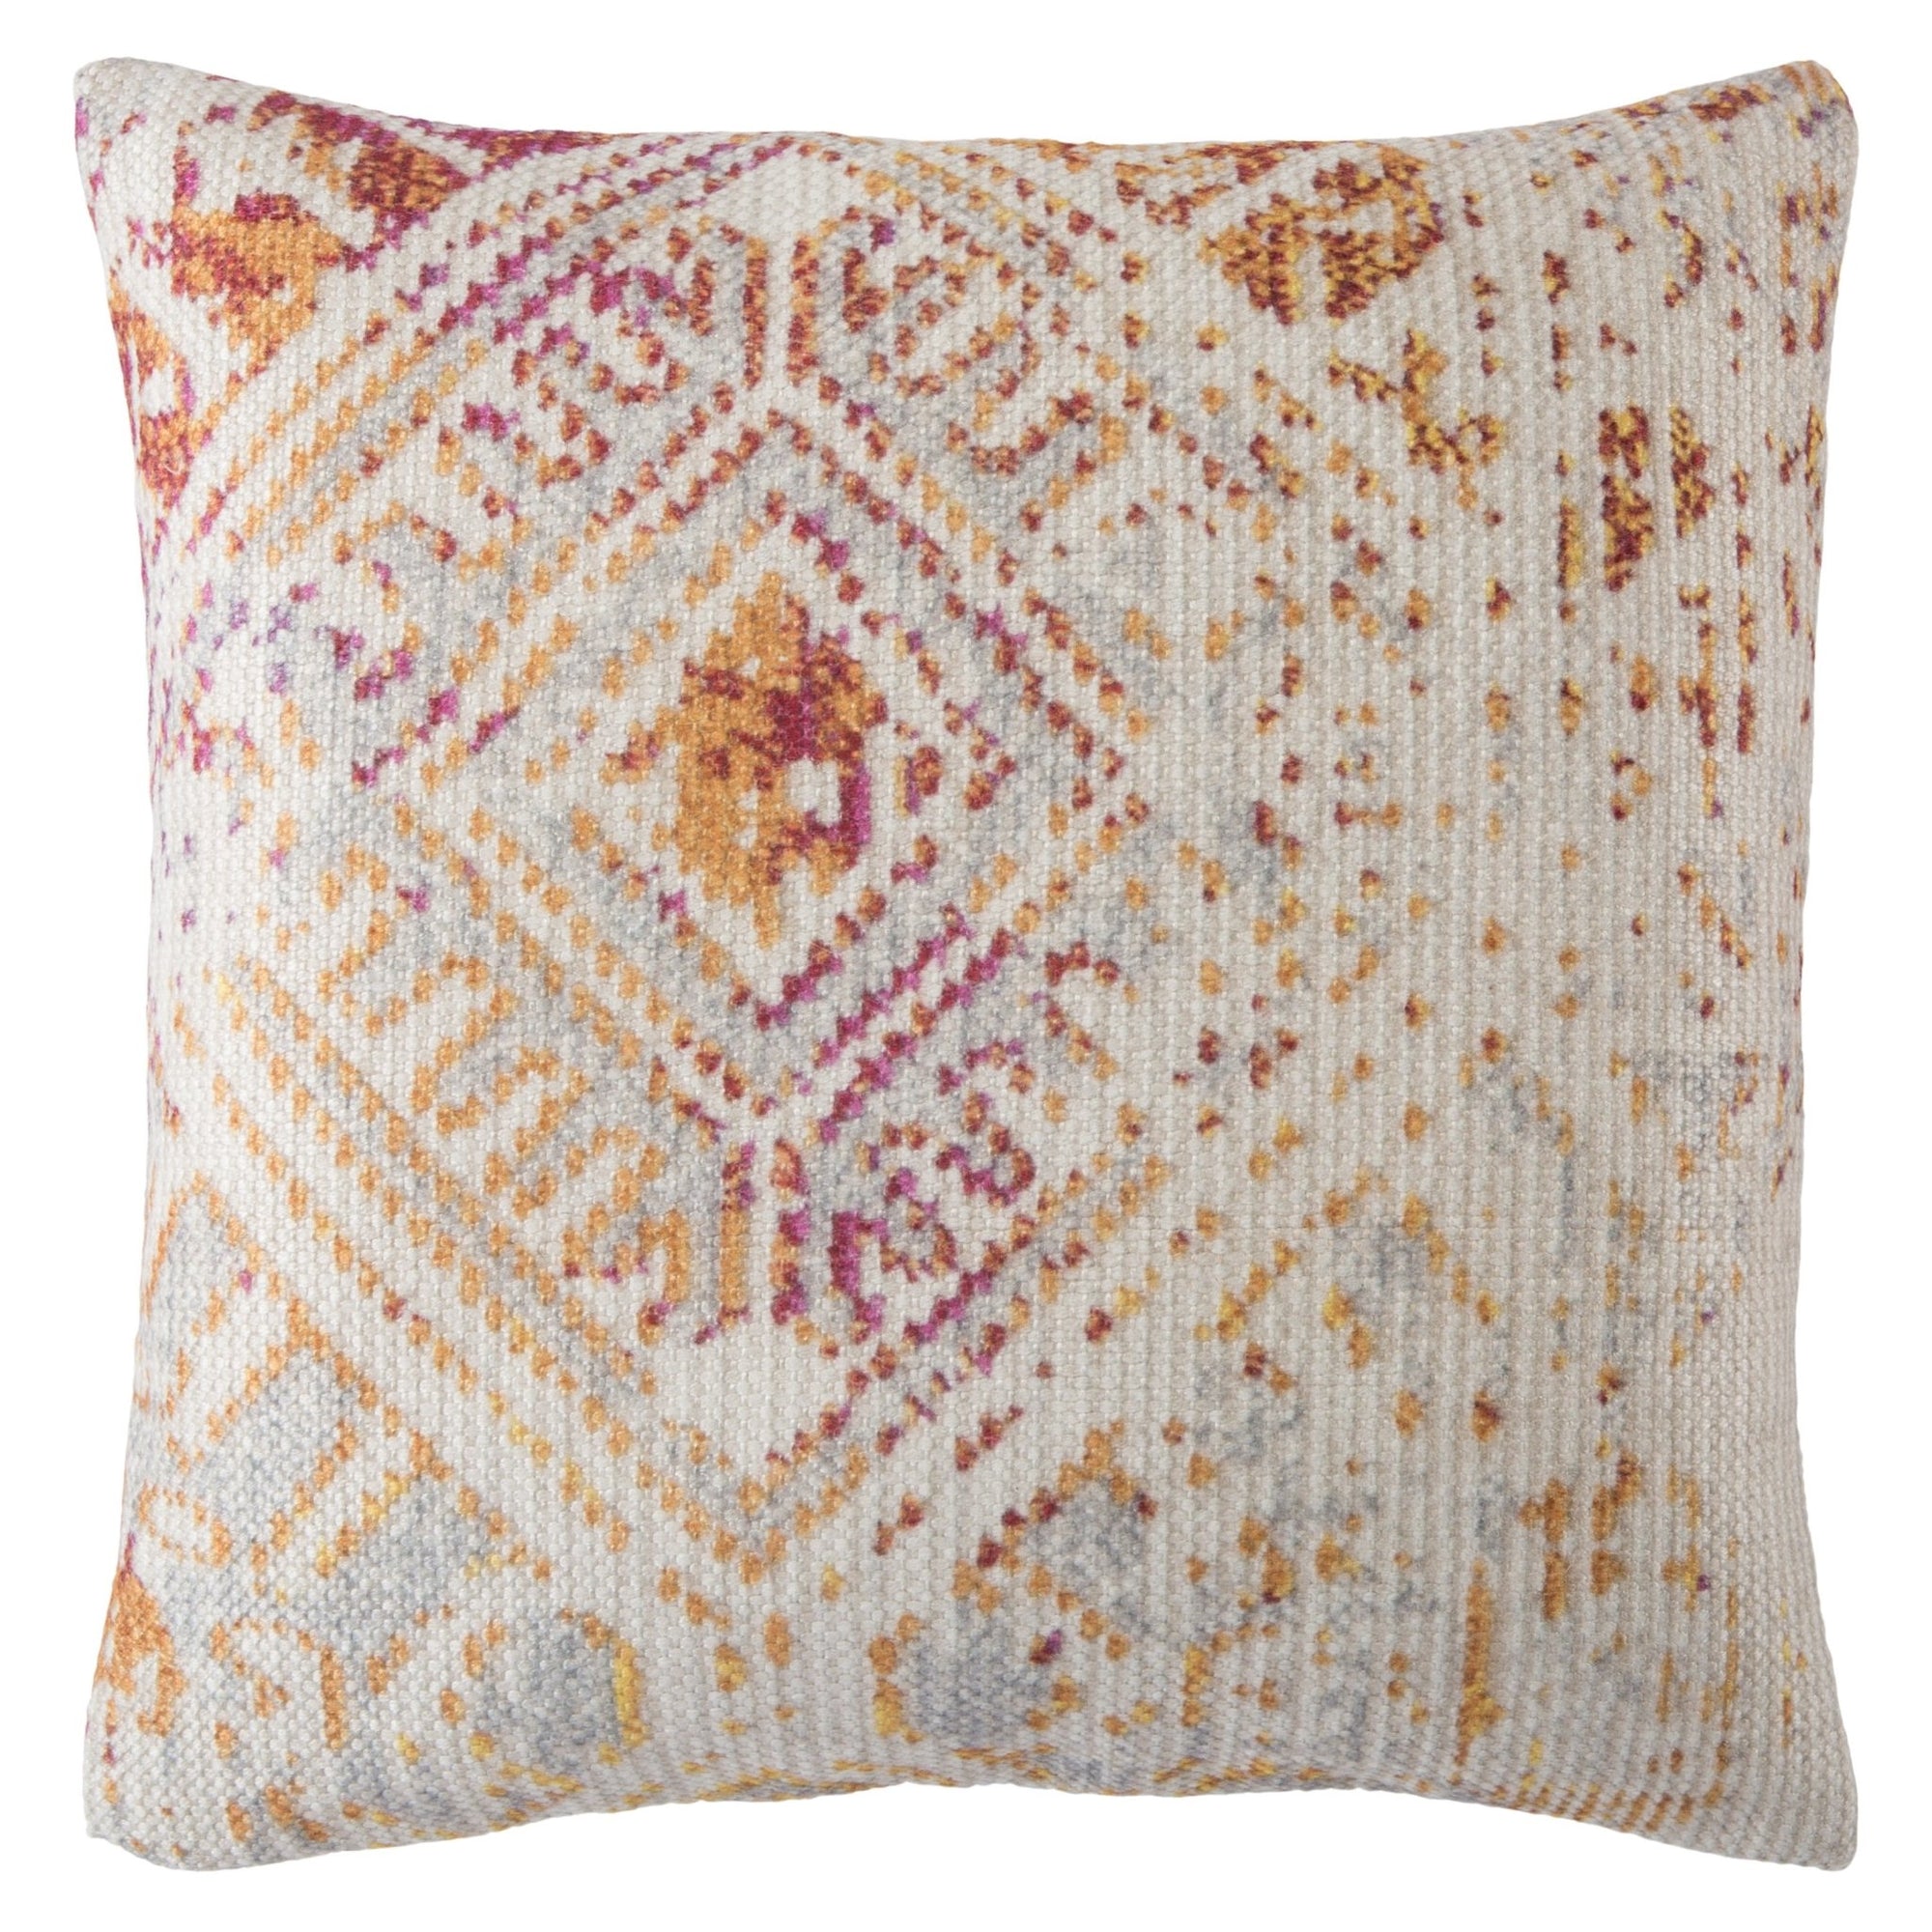 Groove By Nikki Chu Grn05 Siva Pink/Gold Pillow - Rug & Home